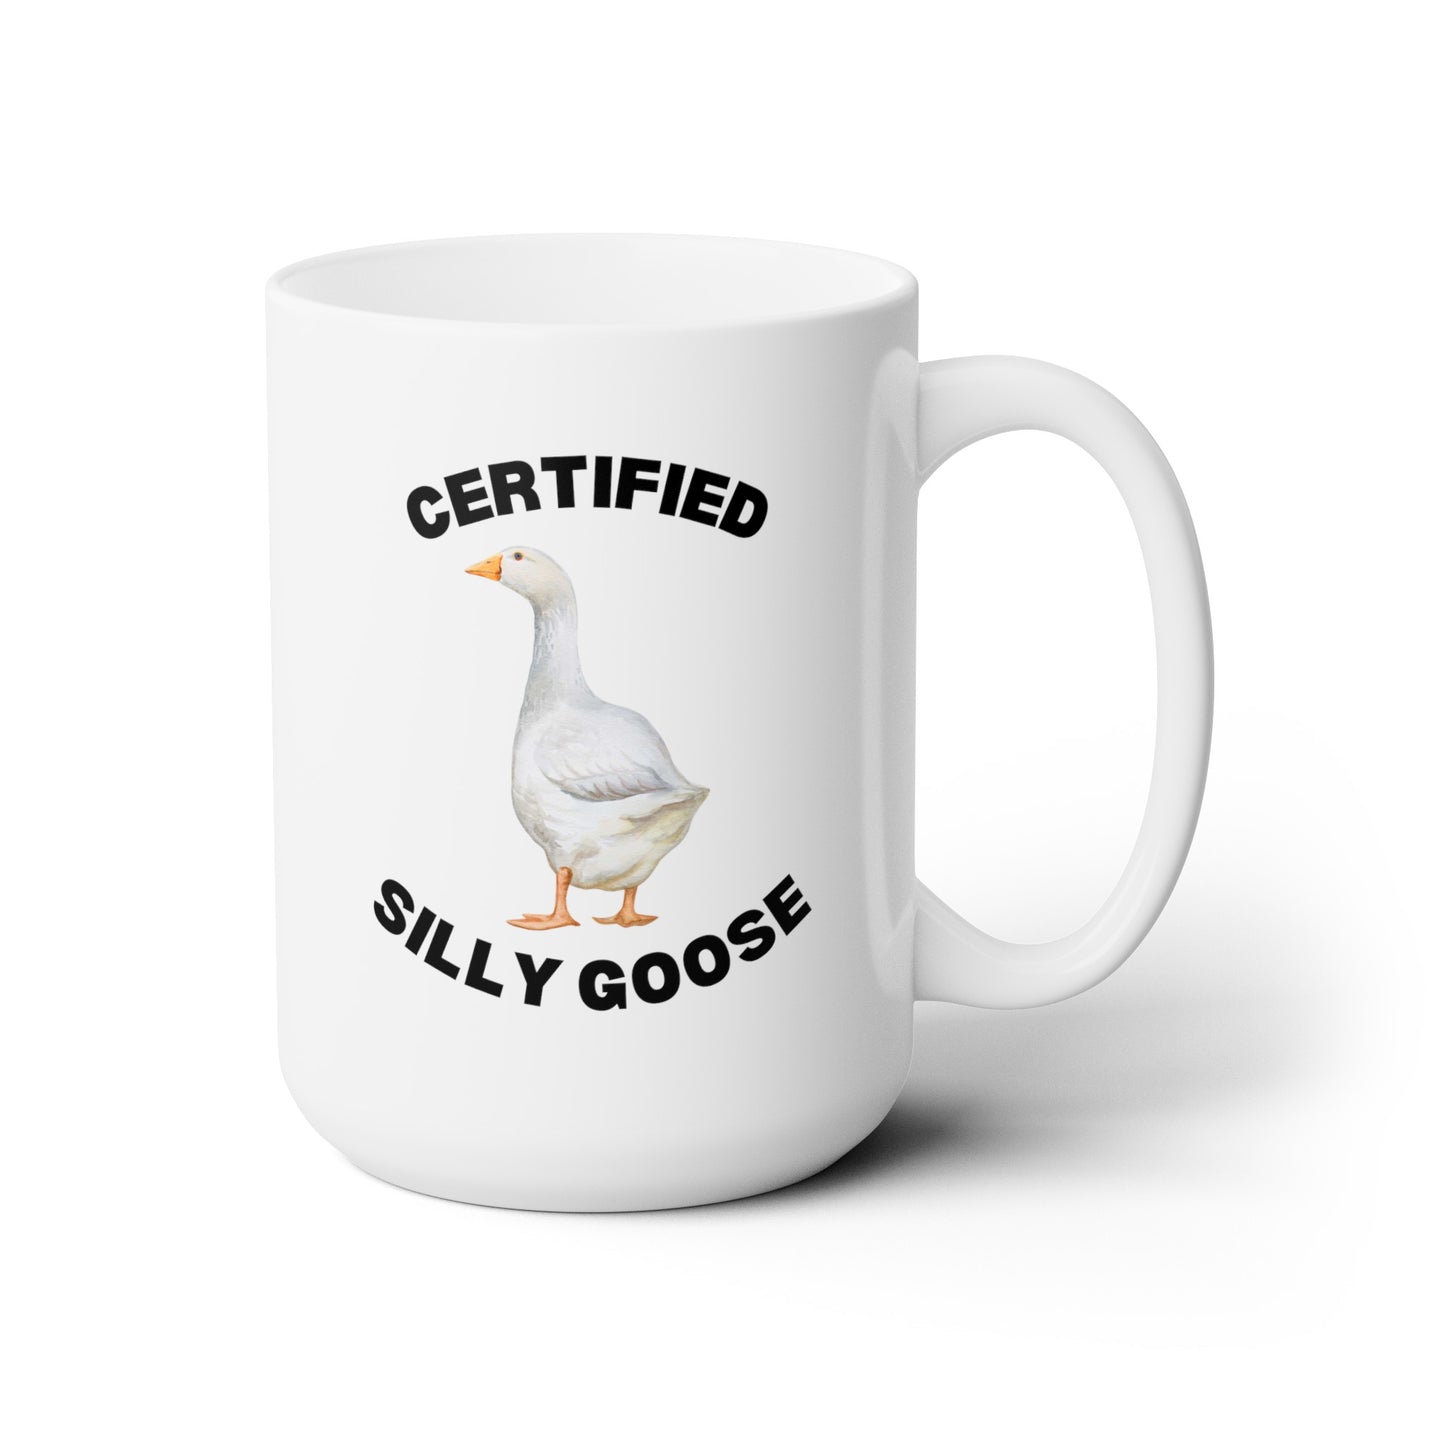 Certified Silly Goose 15oz white funny large coffee mug gift for best friend sibling meme novelty geese lover waveywares wavey wares wavywares wavy wares